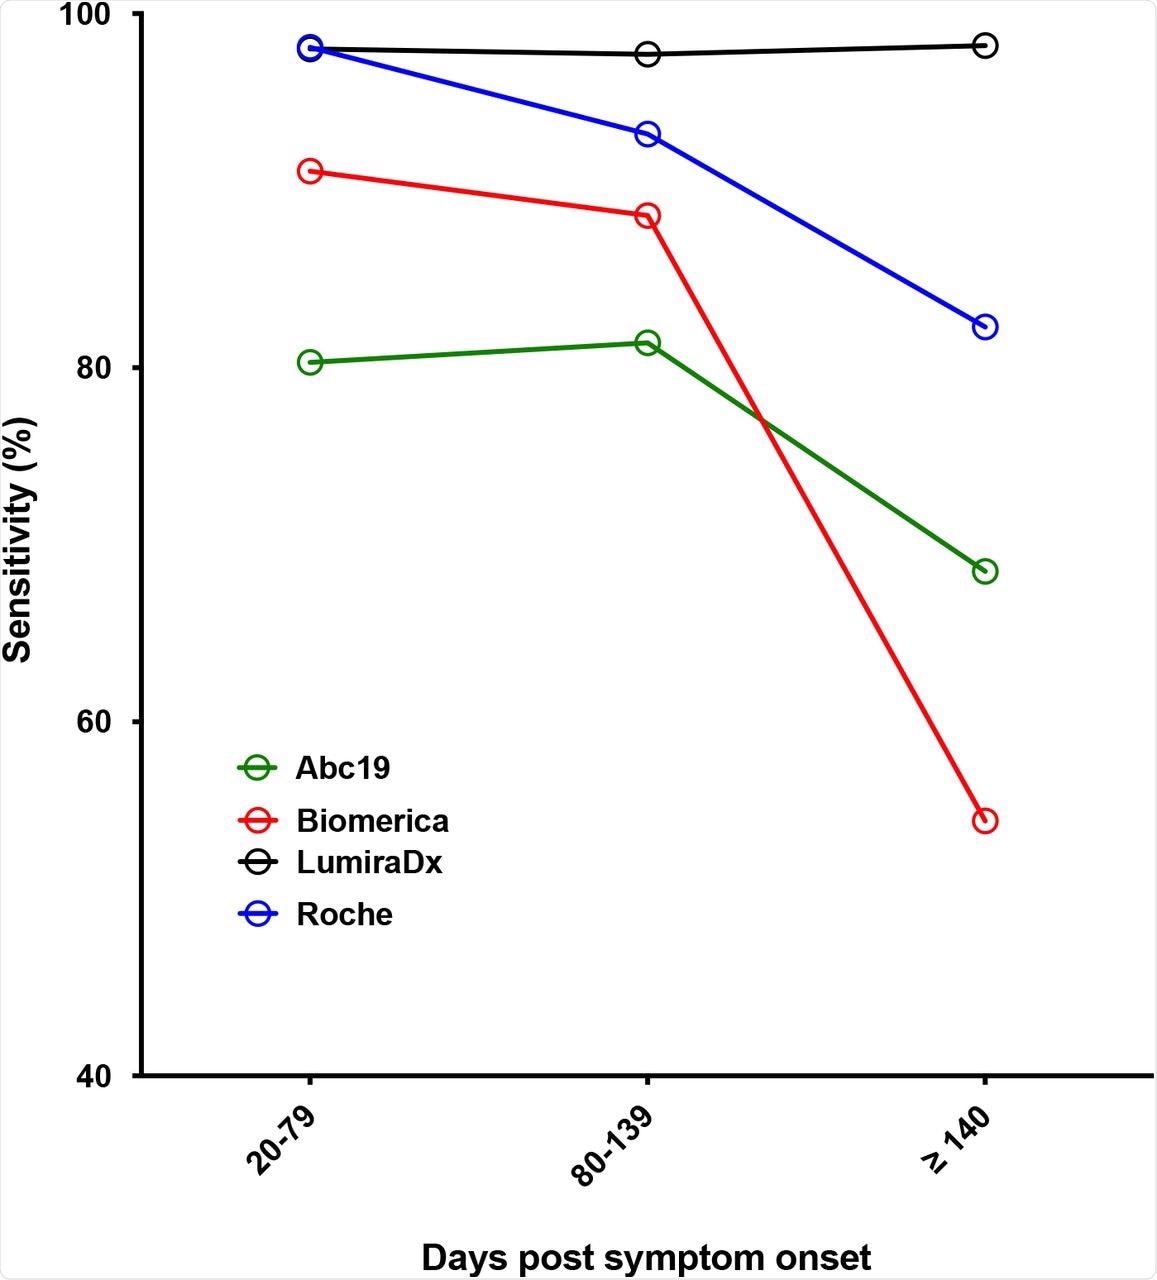 Sensitivity as a function of time after symptom onset for the selected kits (IgG for all LFAs except LumiraDX, where the overall antibody result was used).